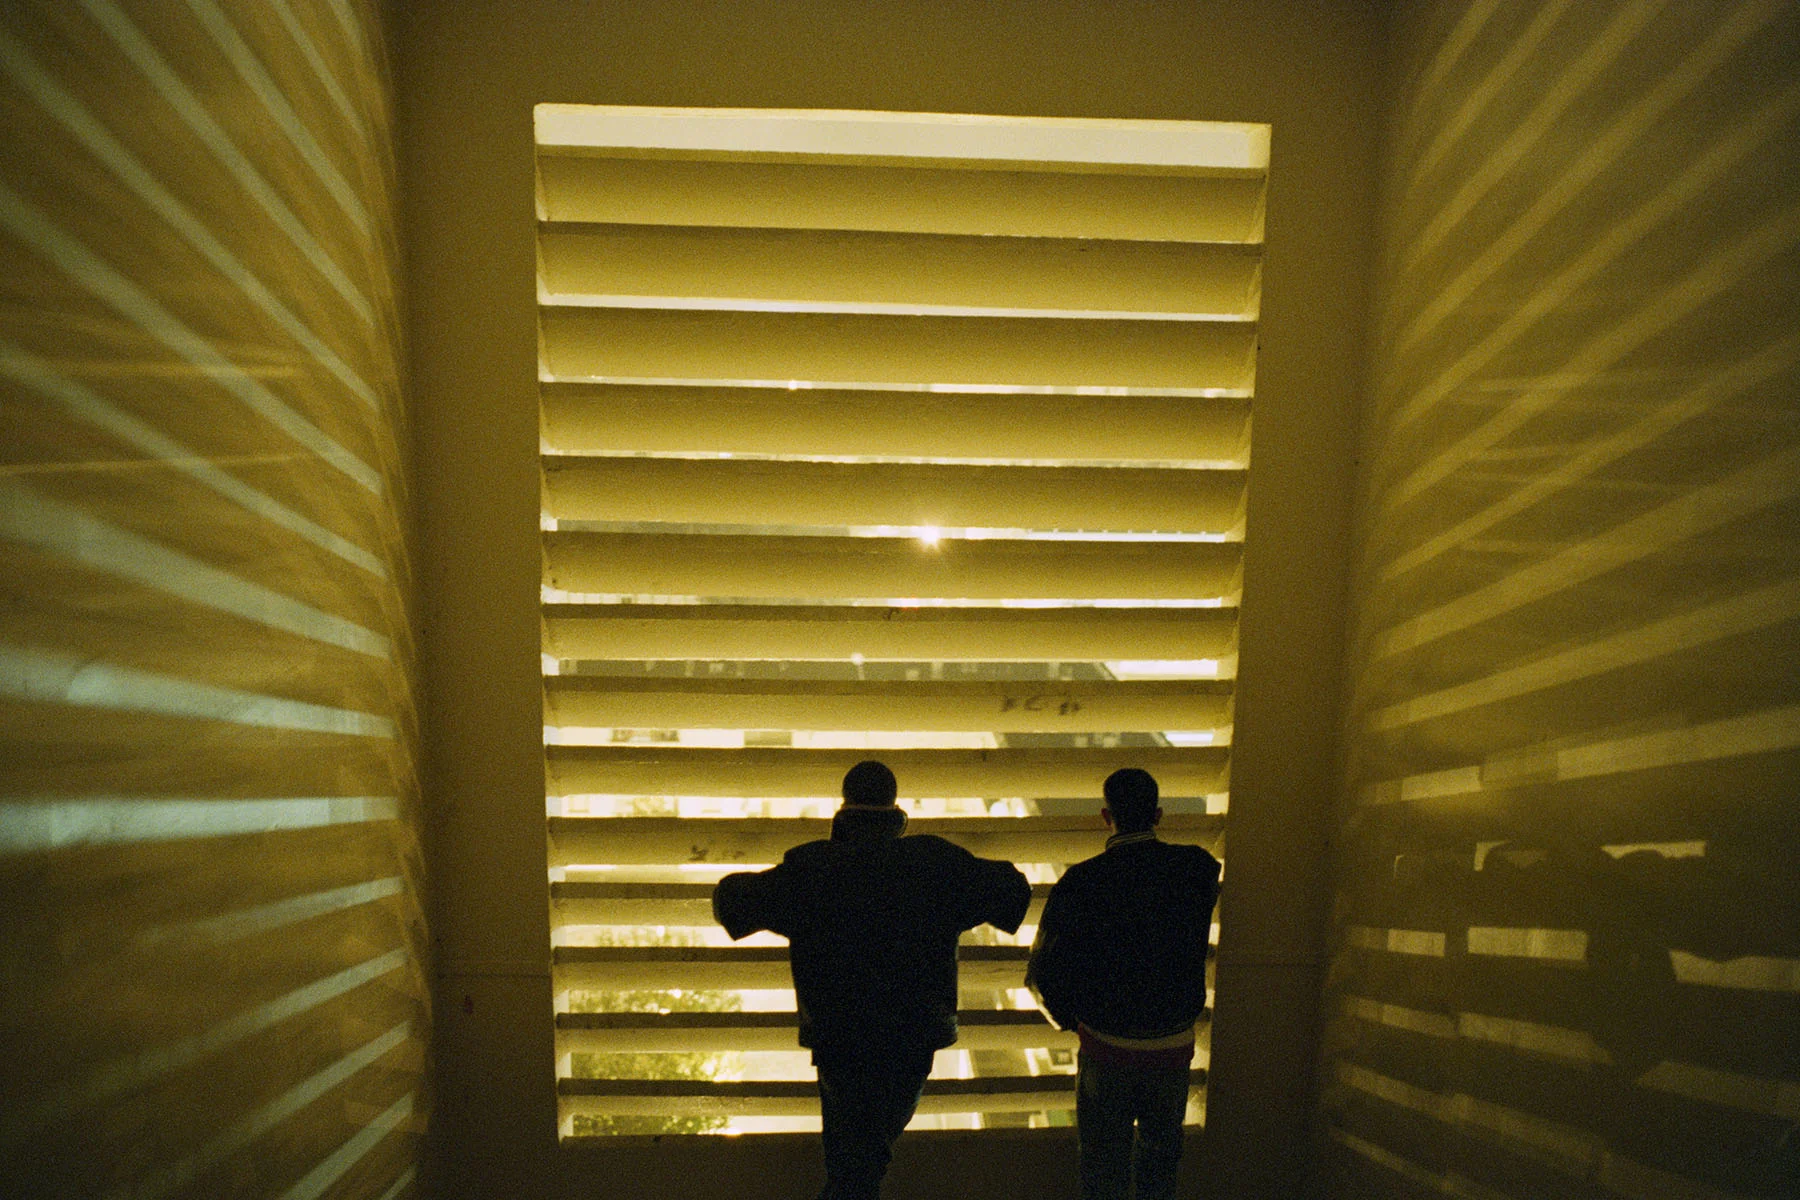 A photo of two young men peering through a slatted wall, taken from the inside. Sunlight pours into the building creating a beautiful yellow light.